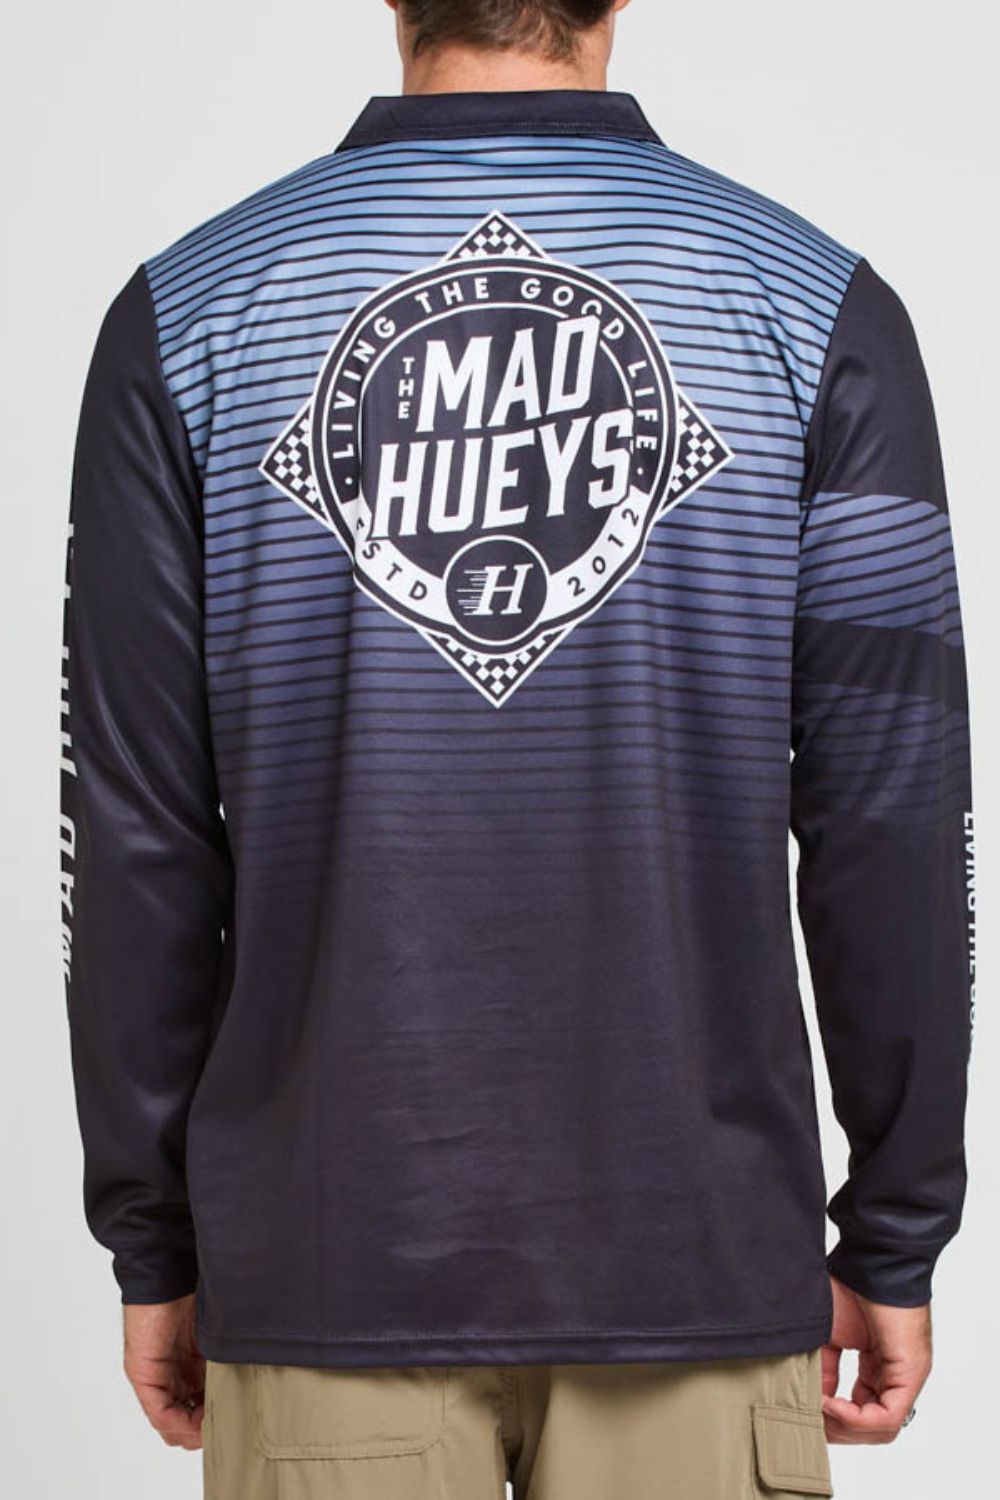 The Mad Hueys Checkered Hueys Fishing Jersey - Titley's Department Store